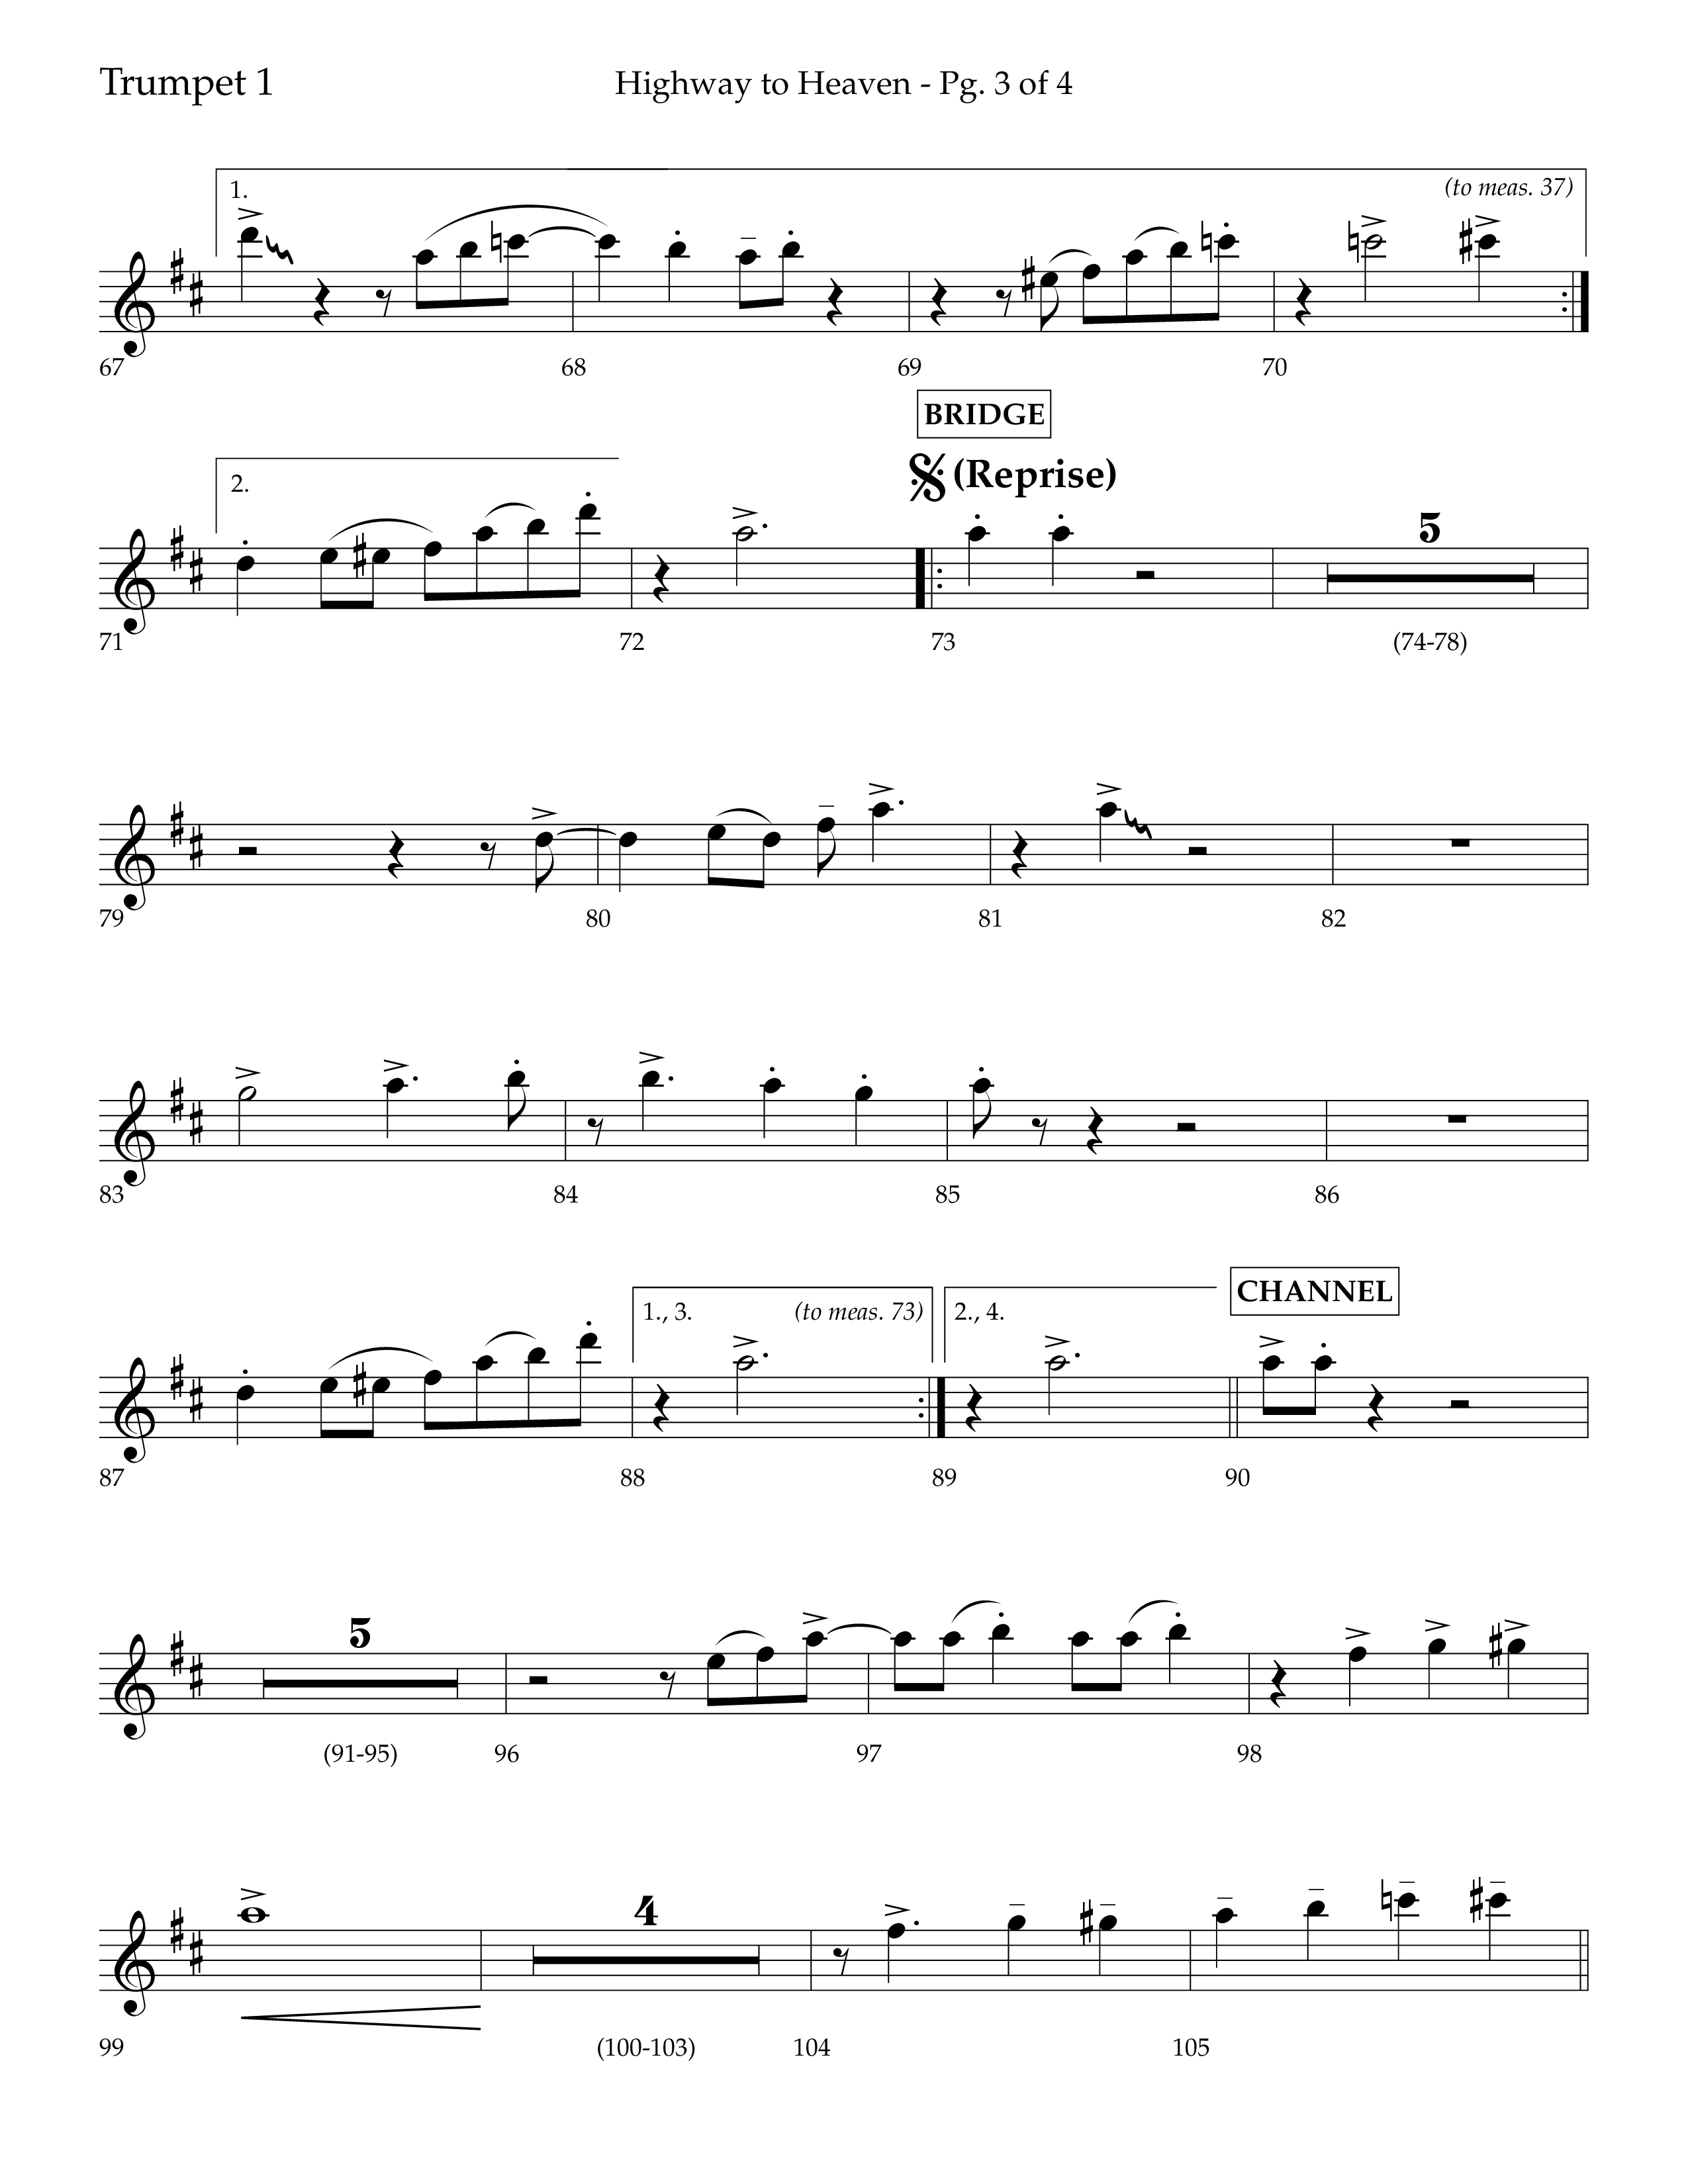 Highway To Heaven with When We All Get To Heaven (Choral Anthem SATB) Trumpet 1 (Lifeway Choral / Arr. Bradley Knight)